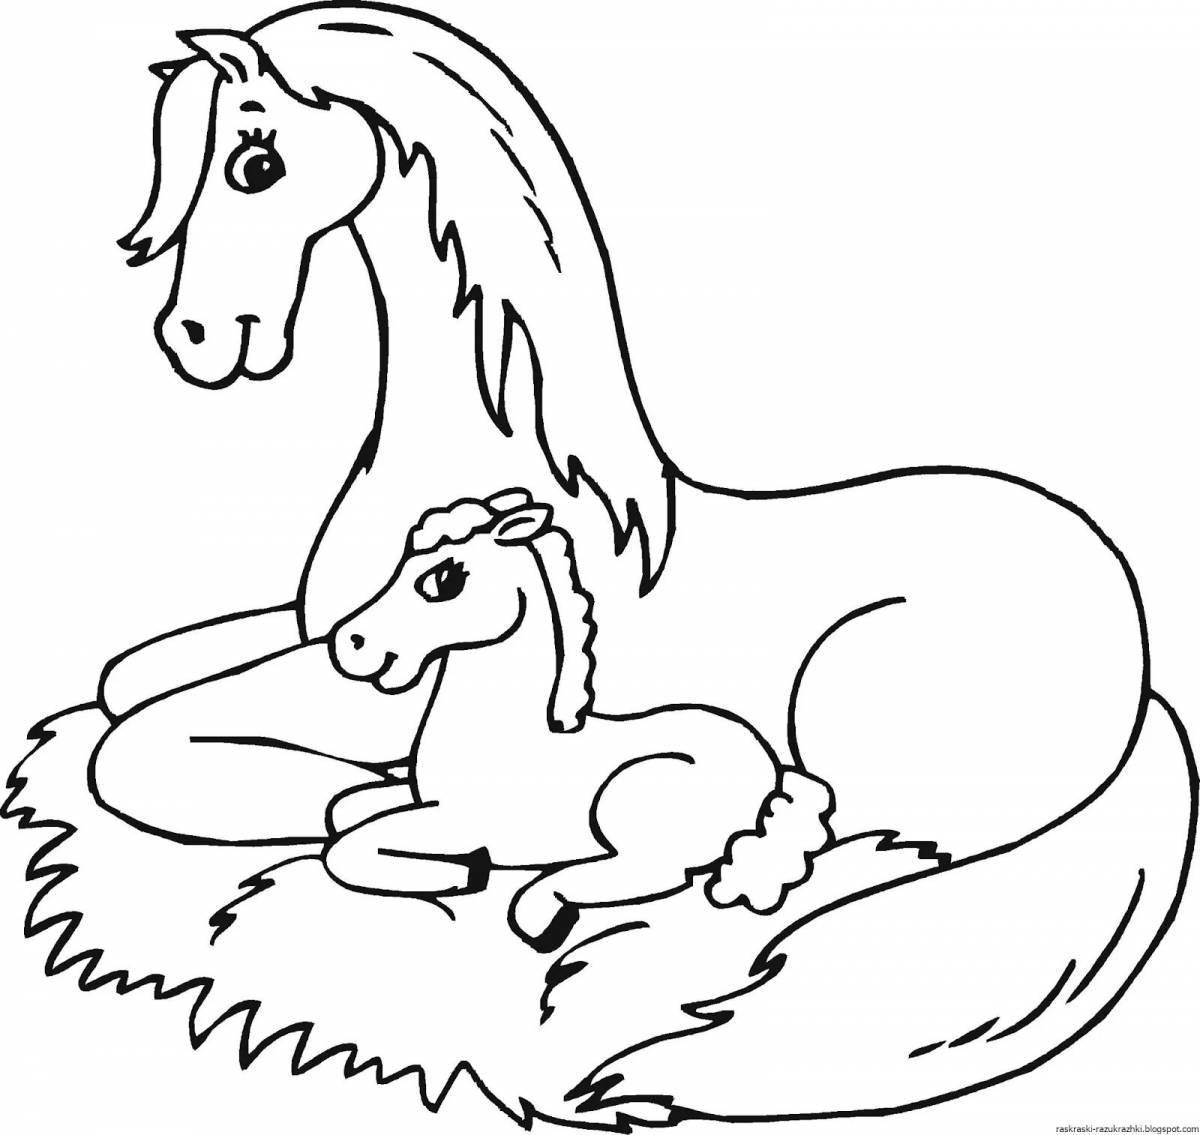 Live coloring horse for children 4-5 years old